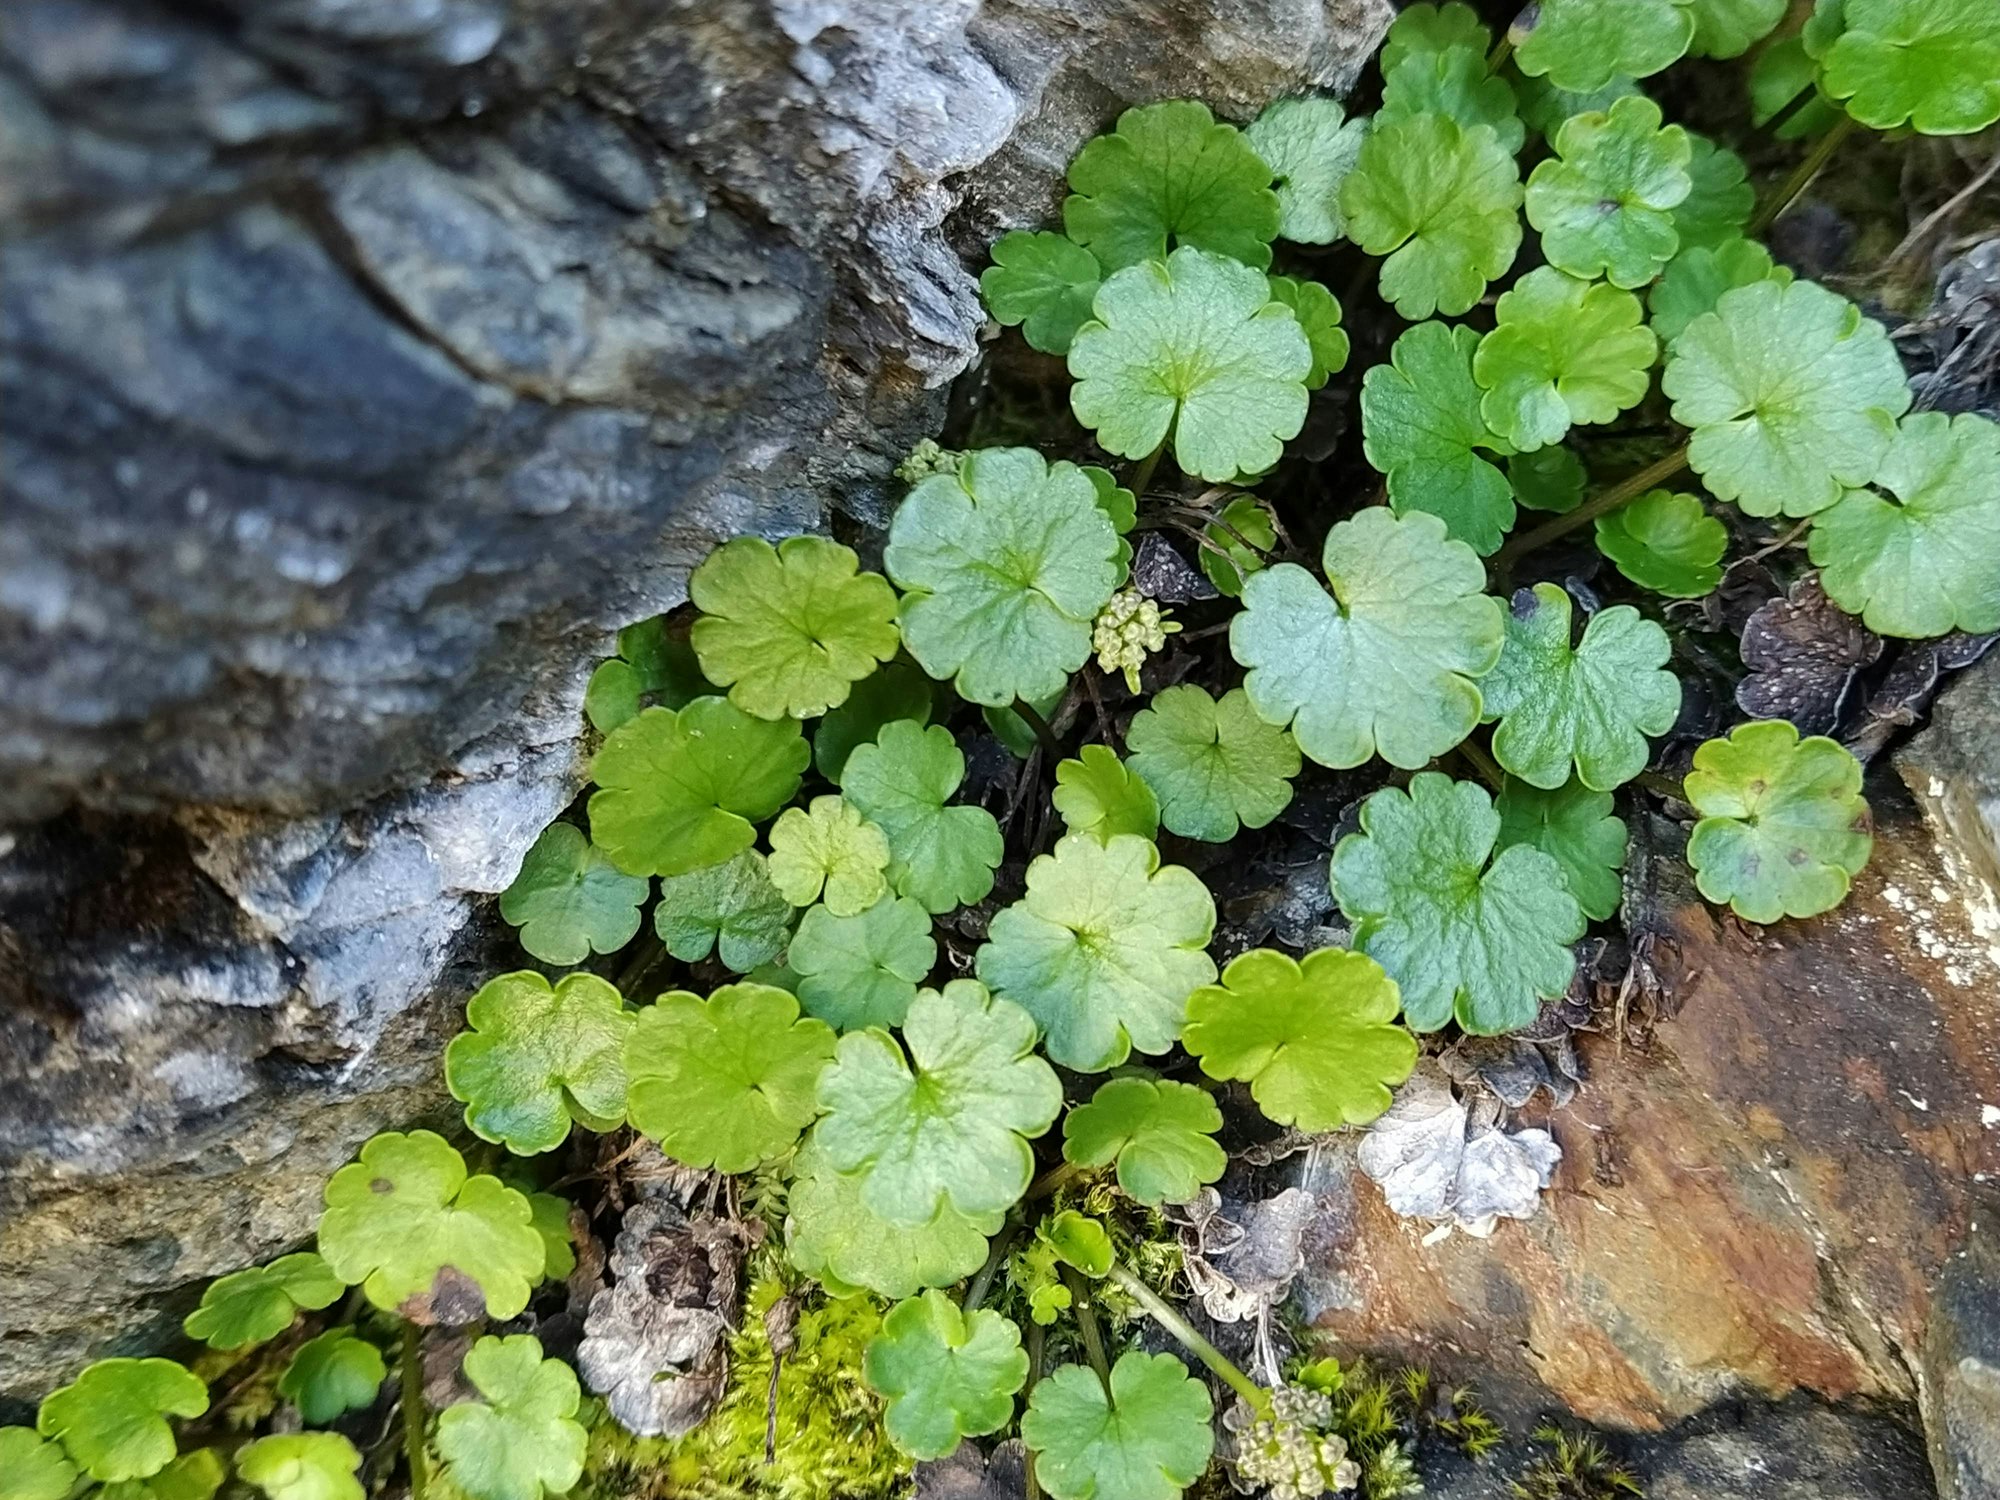 A photo of a spray of green leaves over rocky and mossy terrain